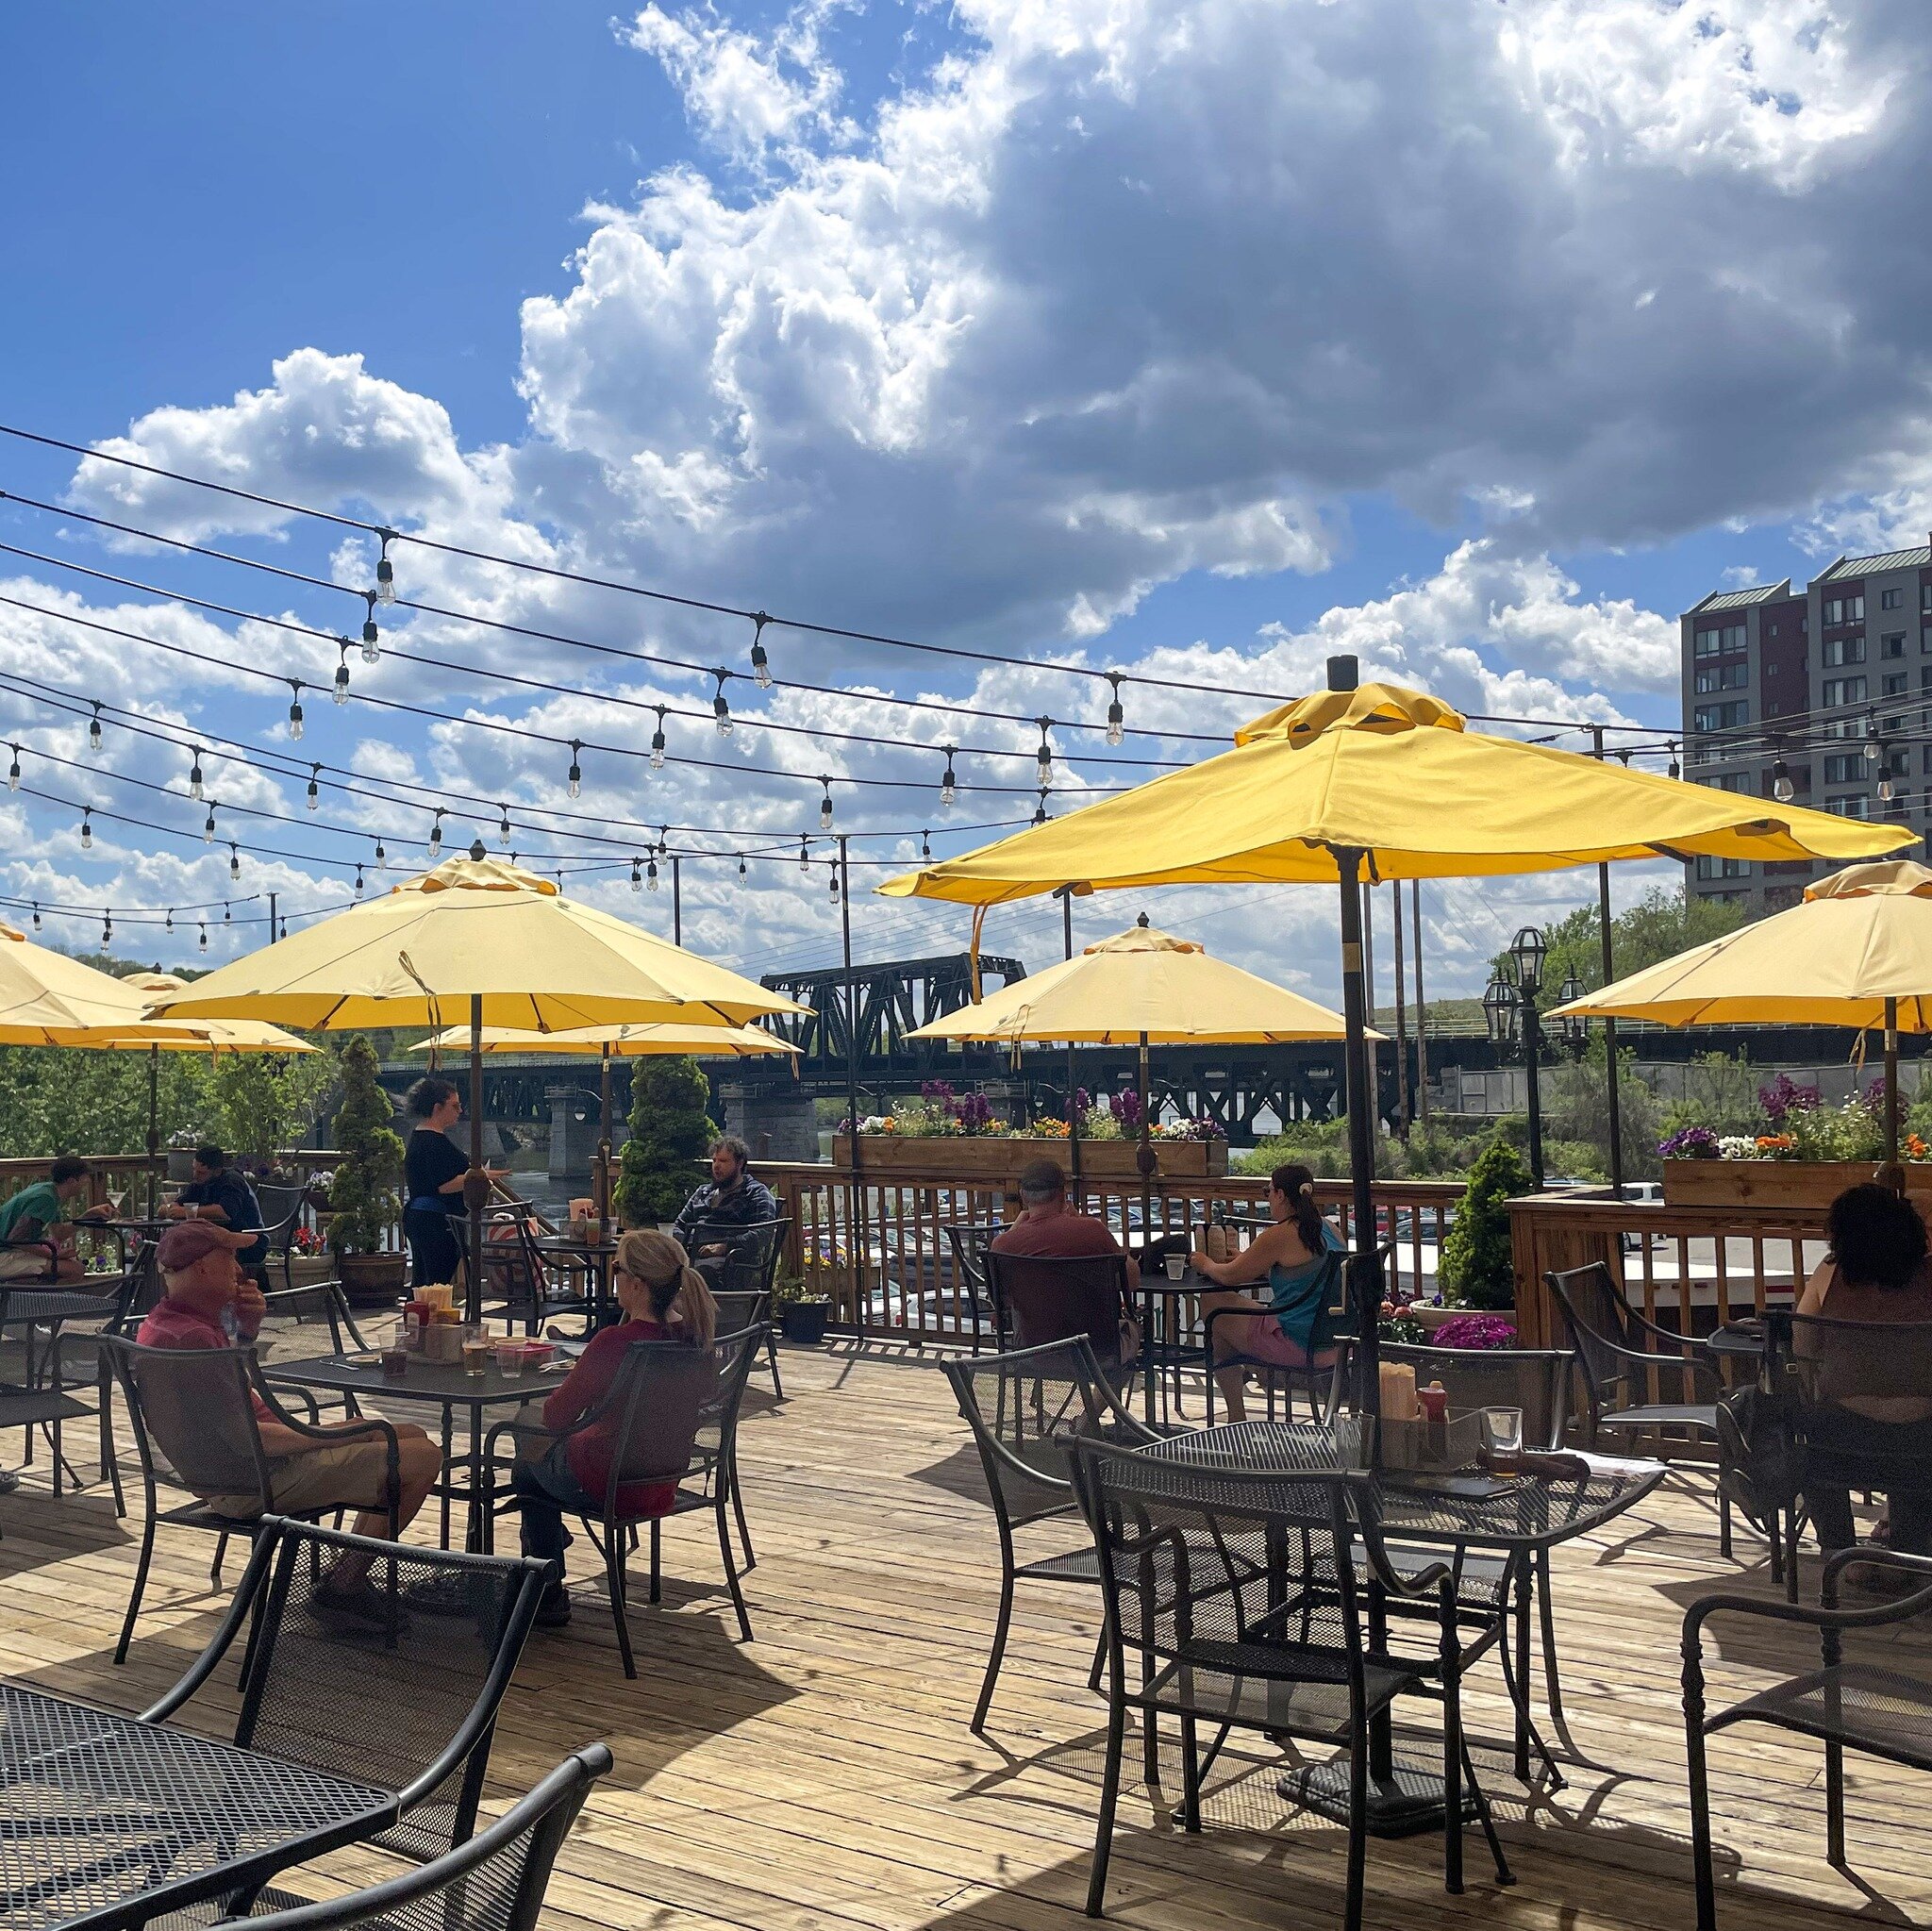 Lovely back deck weather!
#decklife #dineonourdeck #outdoorlunch #haverhill #tapbrewingcompany